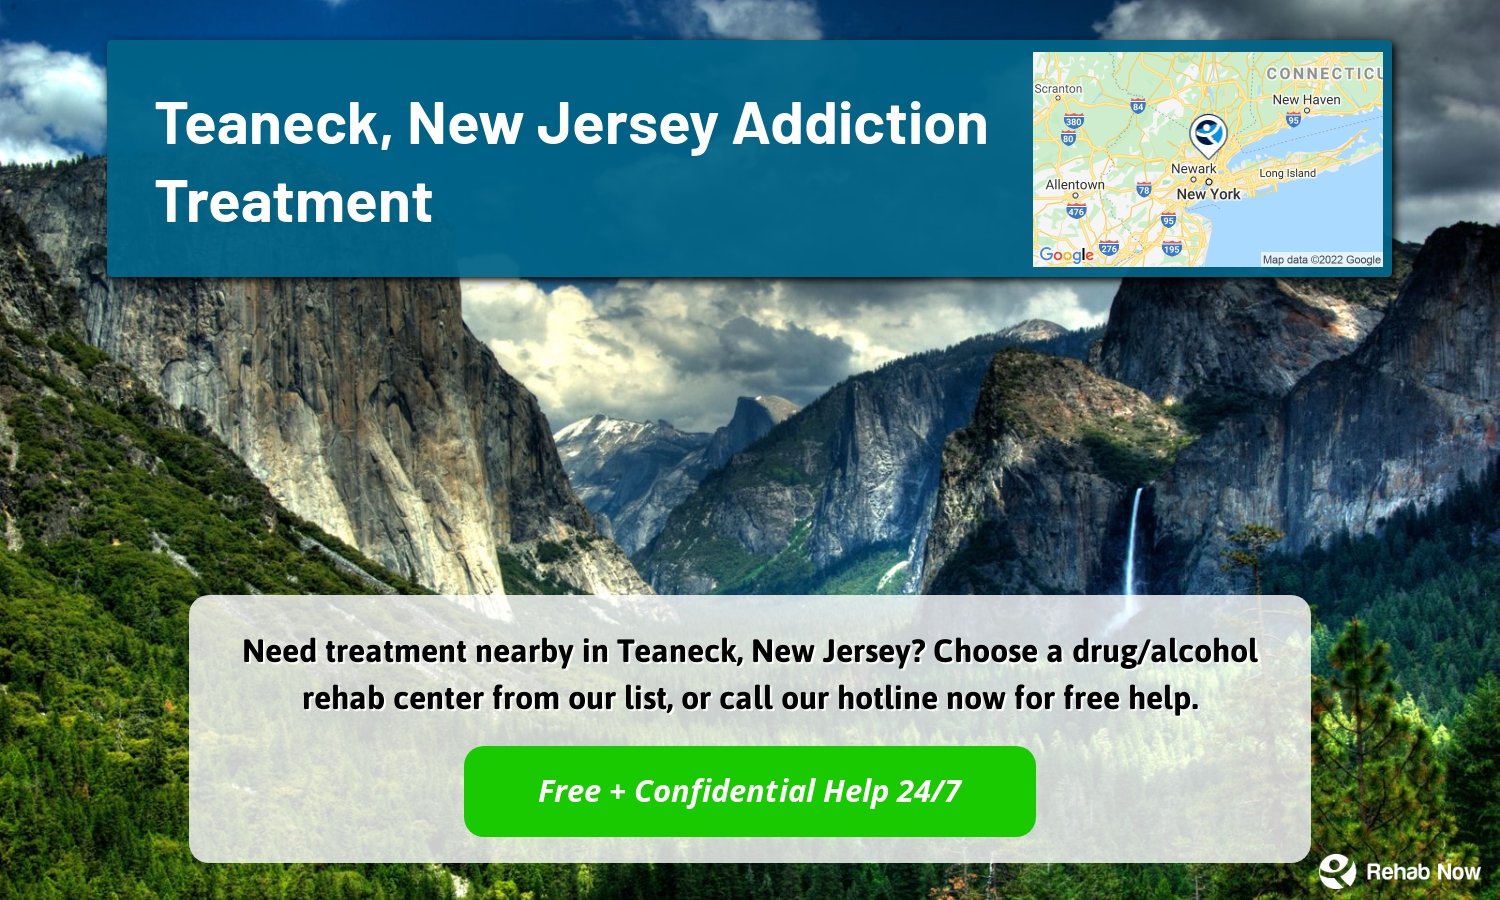 Need treatment nearby in Teaneck, New Jersey? Choose a drug/alcohol rehab center from our list, or call our hotline now for free help.